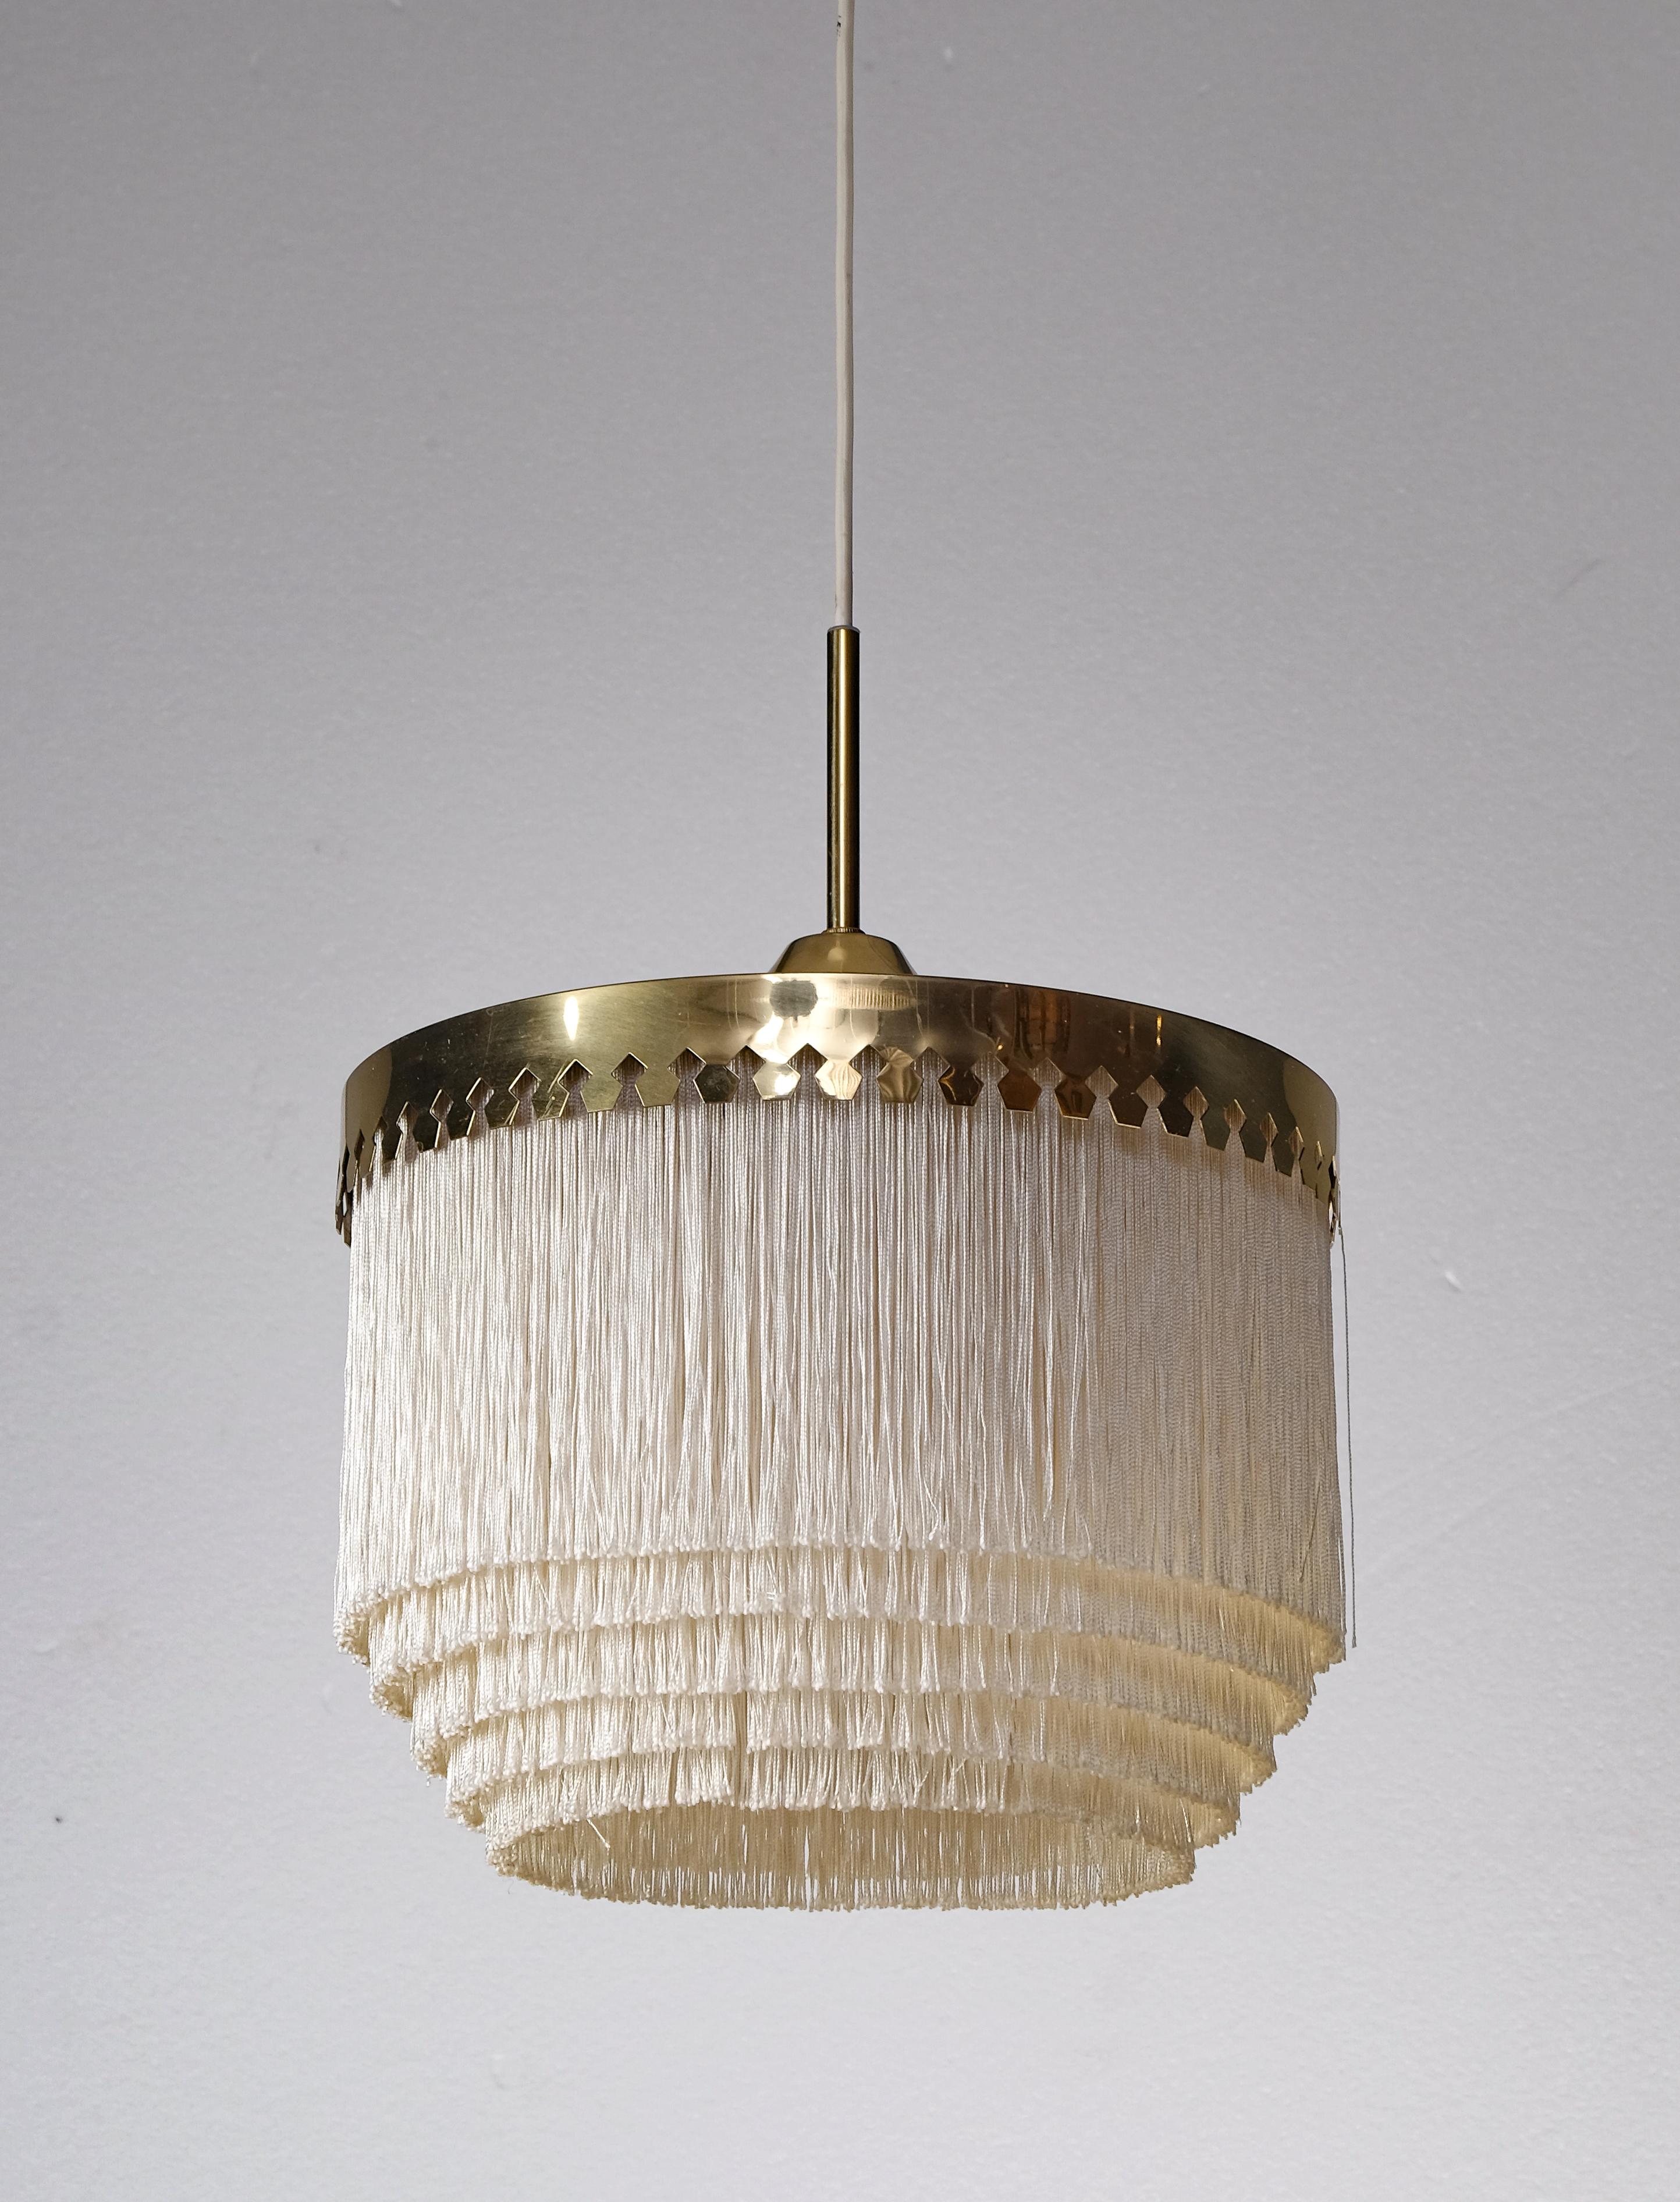 Please note: Listed price is for one (1) pendant.
Brass and white/ivory silk fringes. Produced by Hans-Agne Jakobsson, Markaryd, Sweden, 1960s.
Measure: Diameter 28 cm. Height is adjustable.